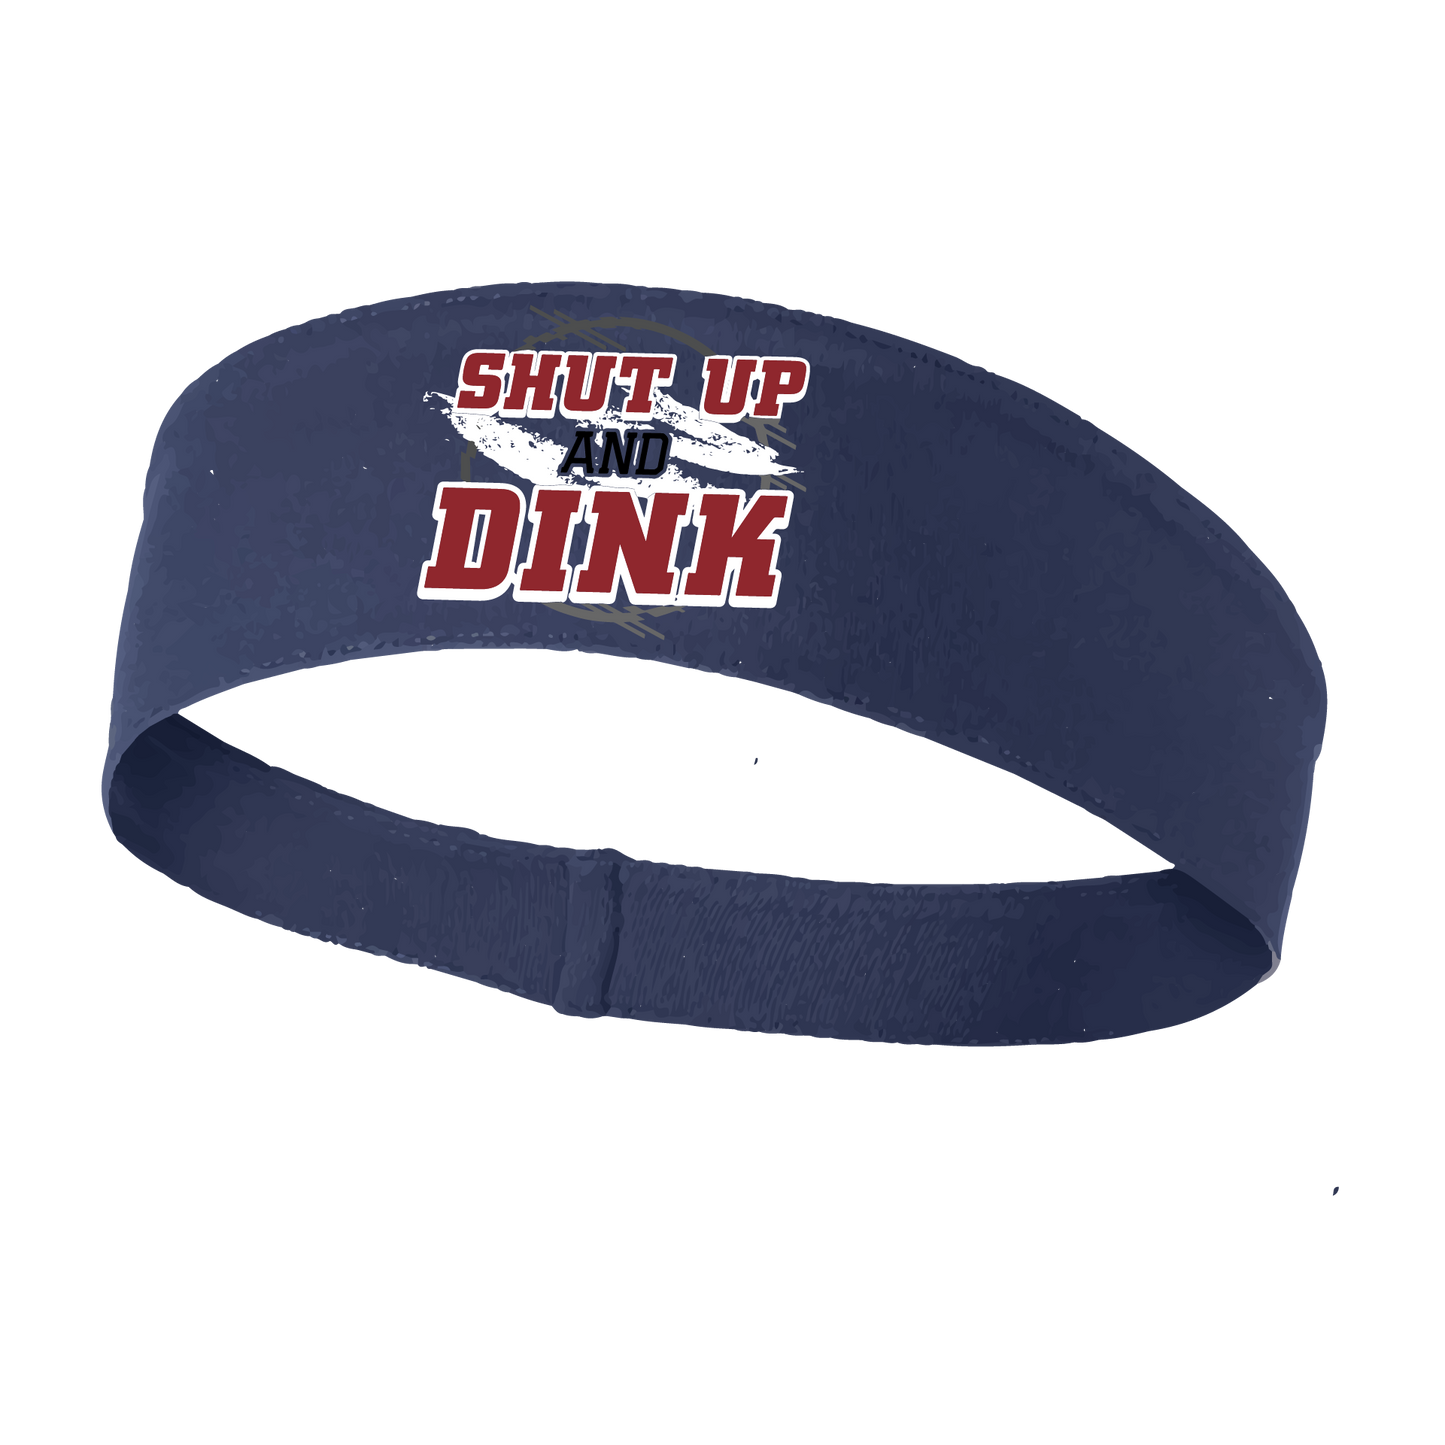 Pickleball Headband Design: Shut Up and Dink  This fun, pickleball designed, moisture-wicking headband narrows in the back to fit more securely. Single-needle top-stitched edging. These headbands come in a variety of colors. Truly shows your love for the sport of pickleball!!